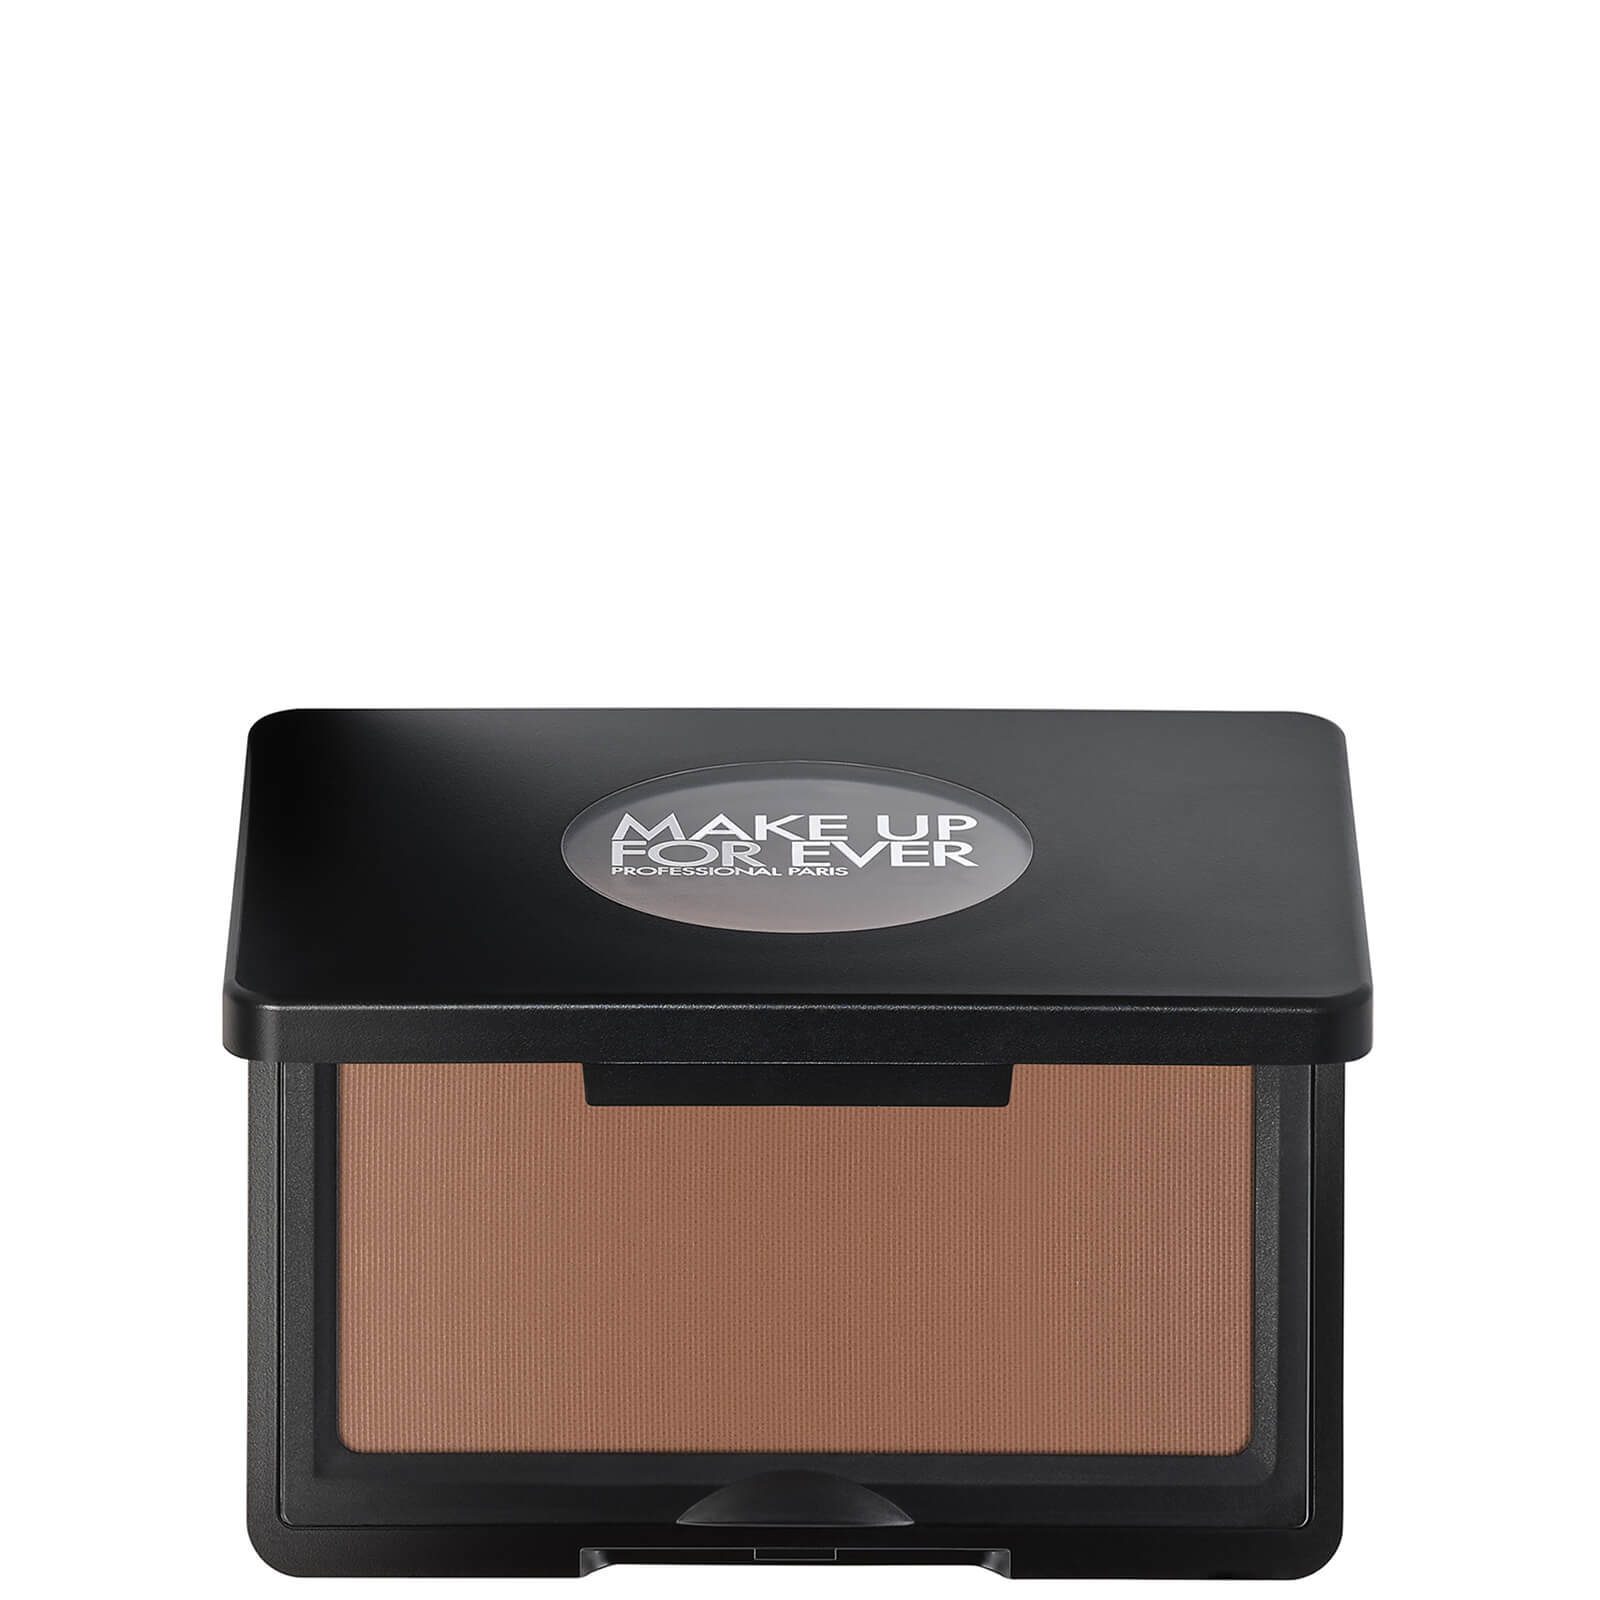 MAKE UP FOR EVER Artist Face Powders Sculpt 4g (Various Shades) - S440 - Powerful Mocha